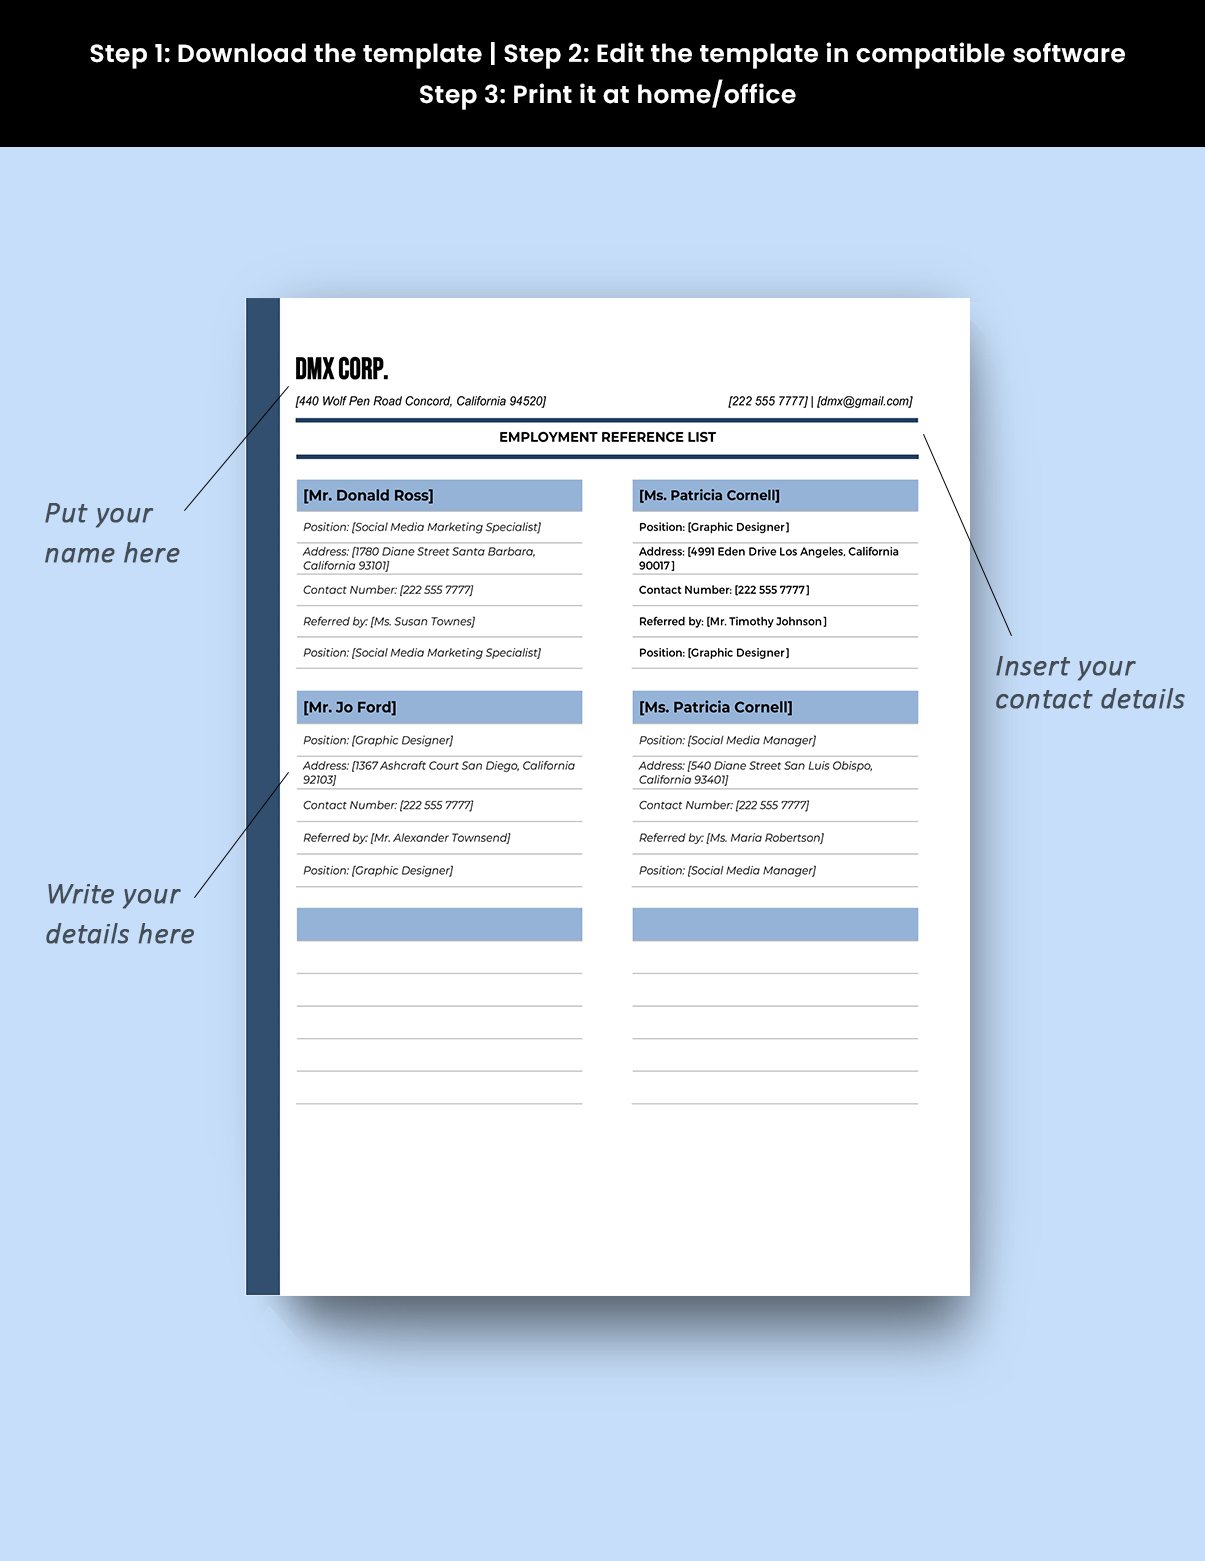 Employment Reference List Template